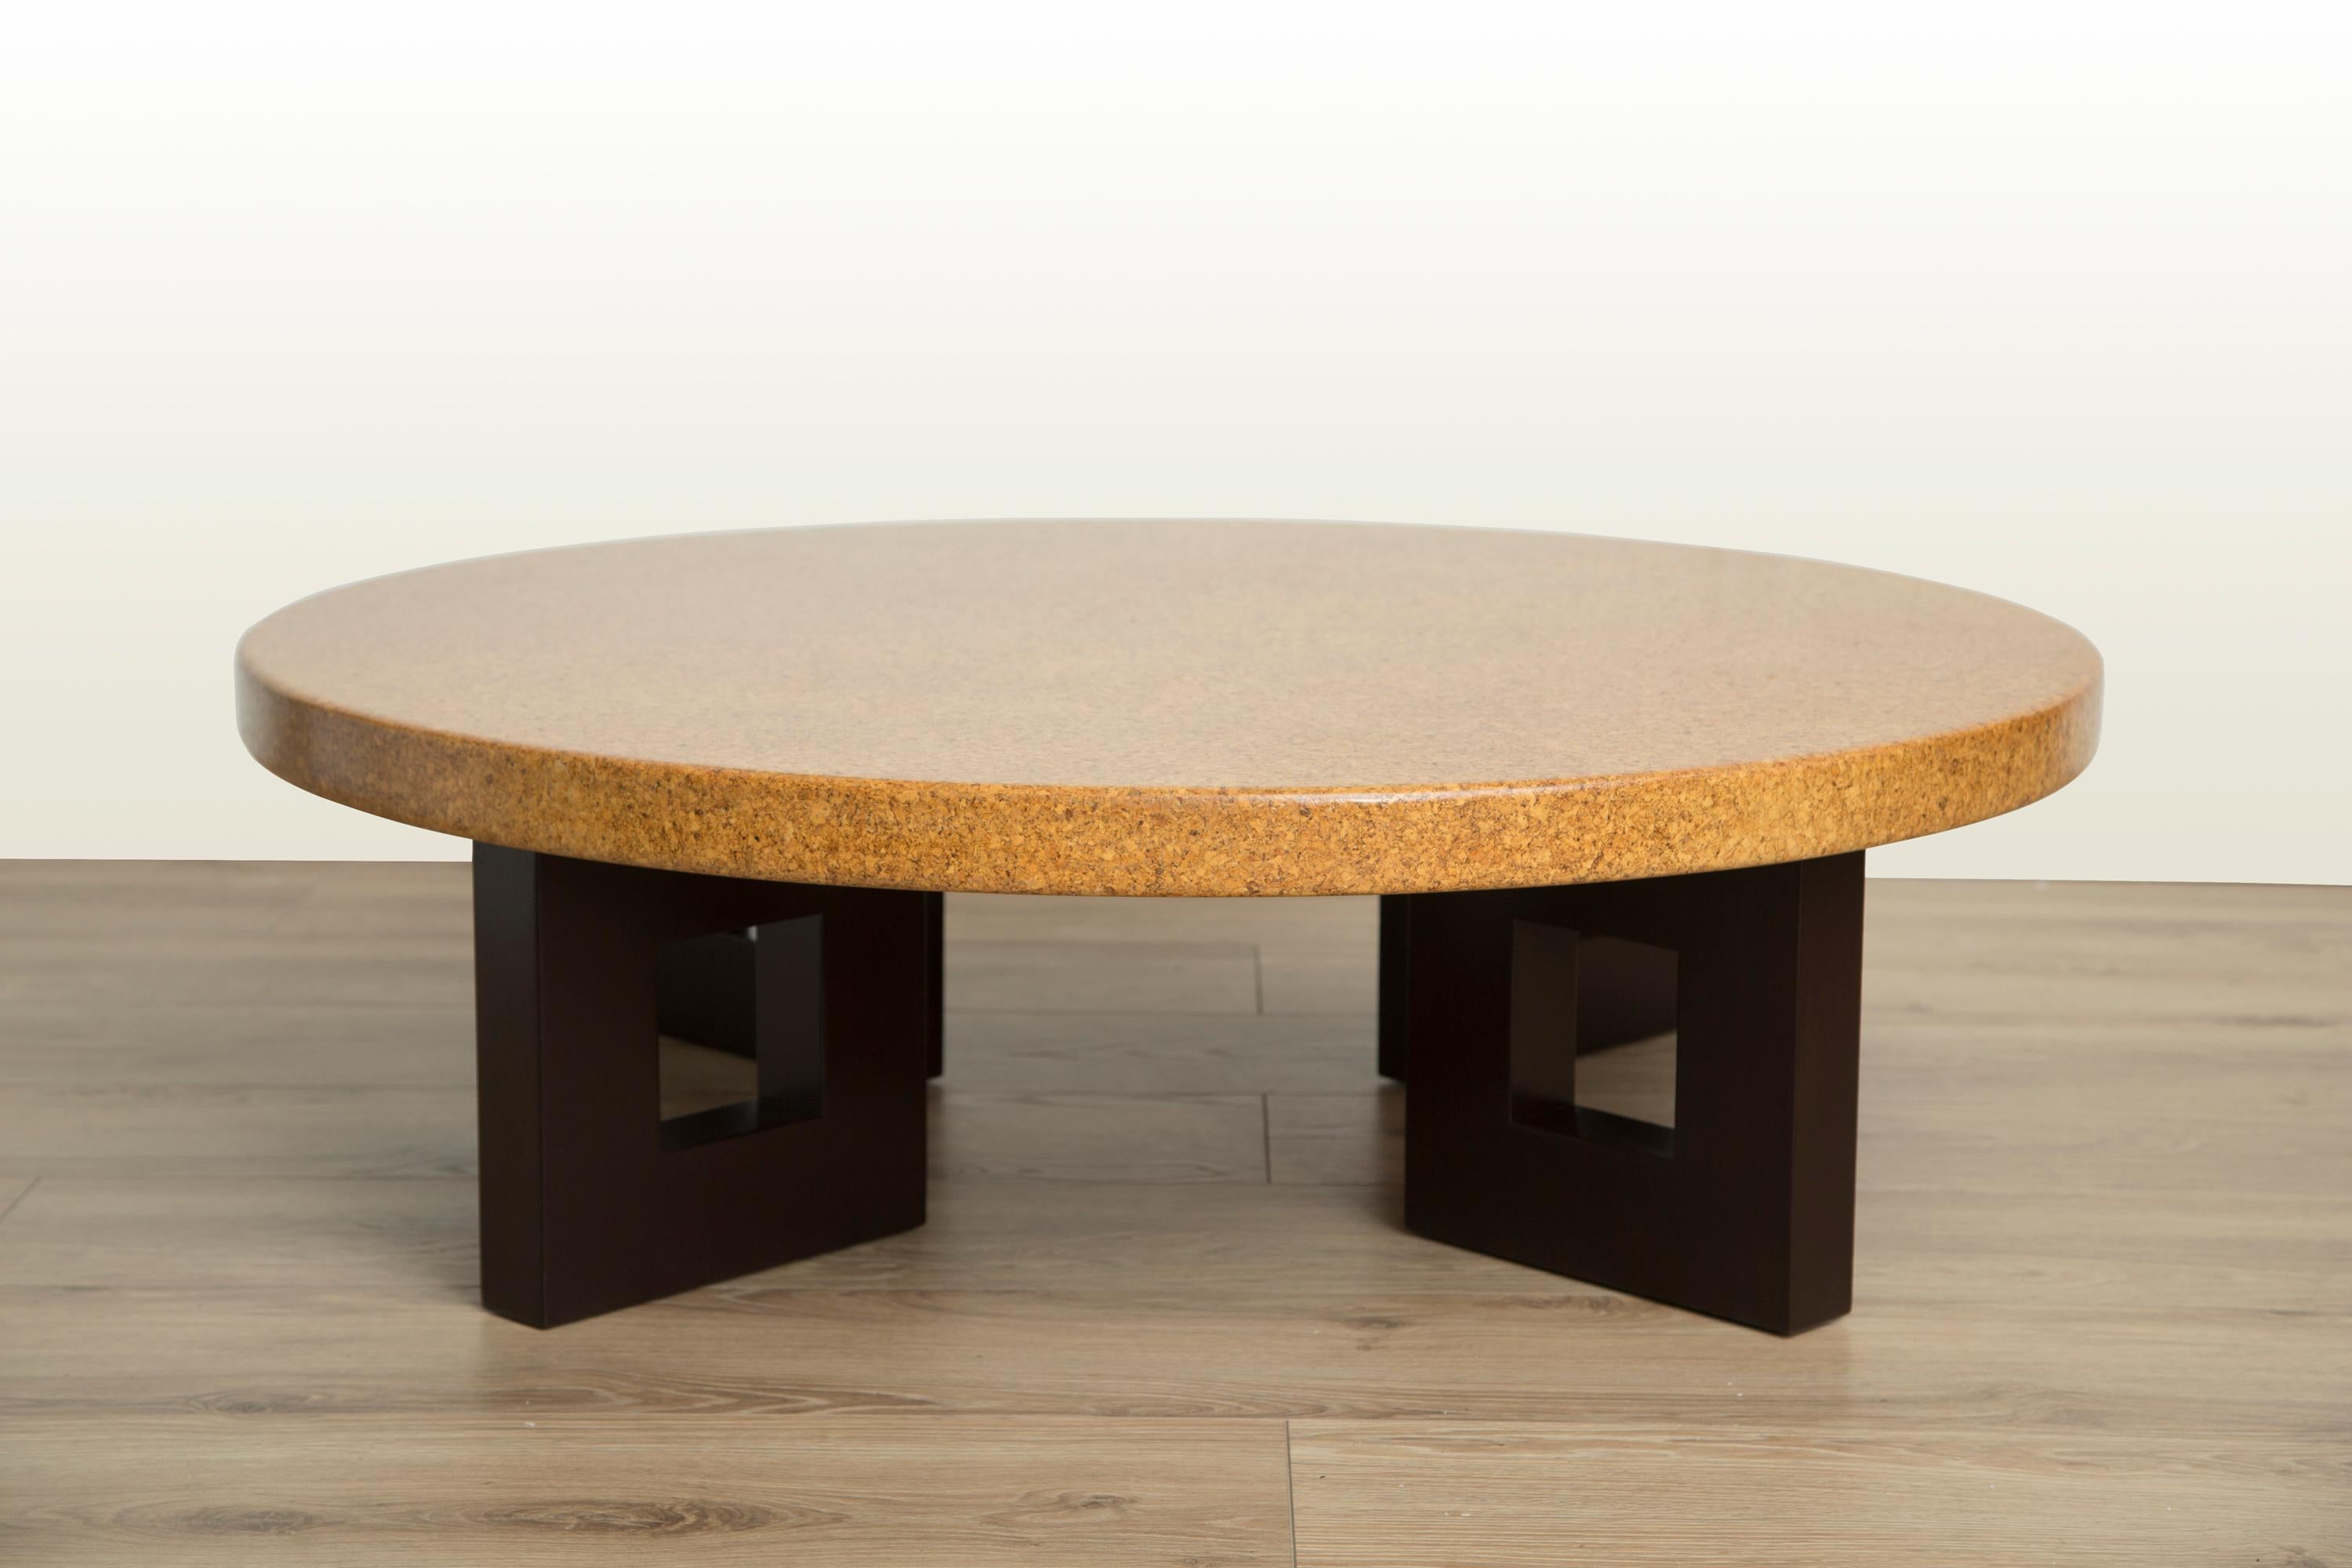 Mid-Century Modern round cork top coffee table with stained mahogany frame-shaped legs by Paul Frankl for Johnson Furniture.
Model #5021, circa 1950.
Newly refinished to mint condition.
 